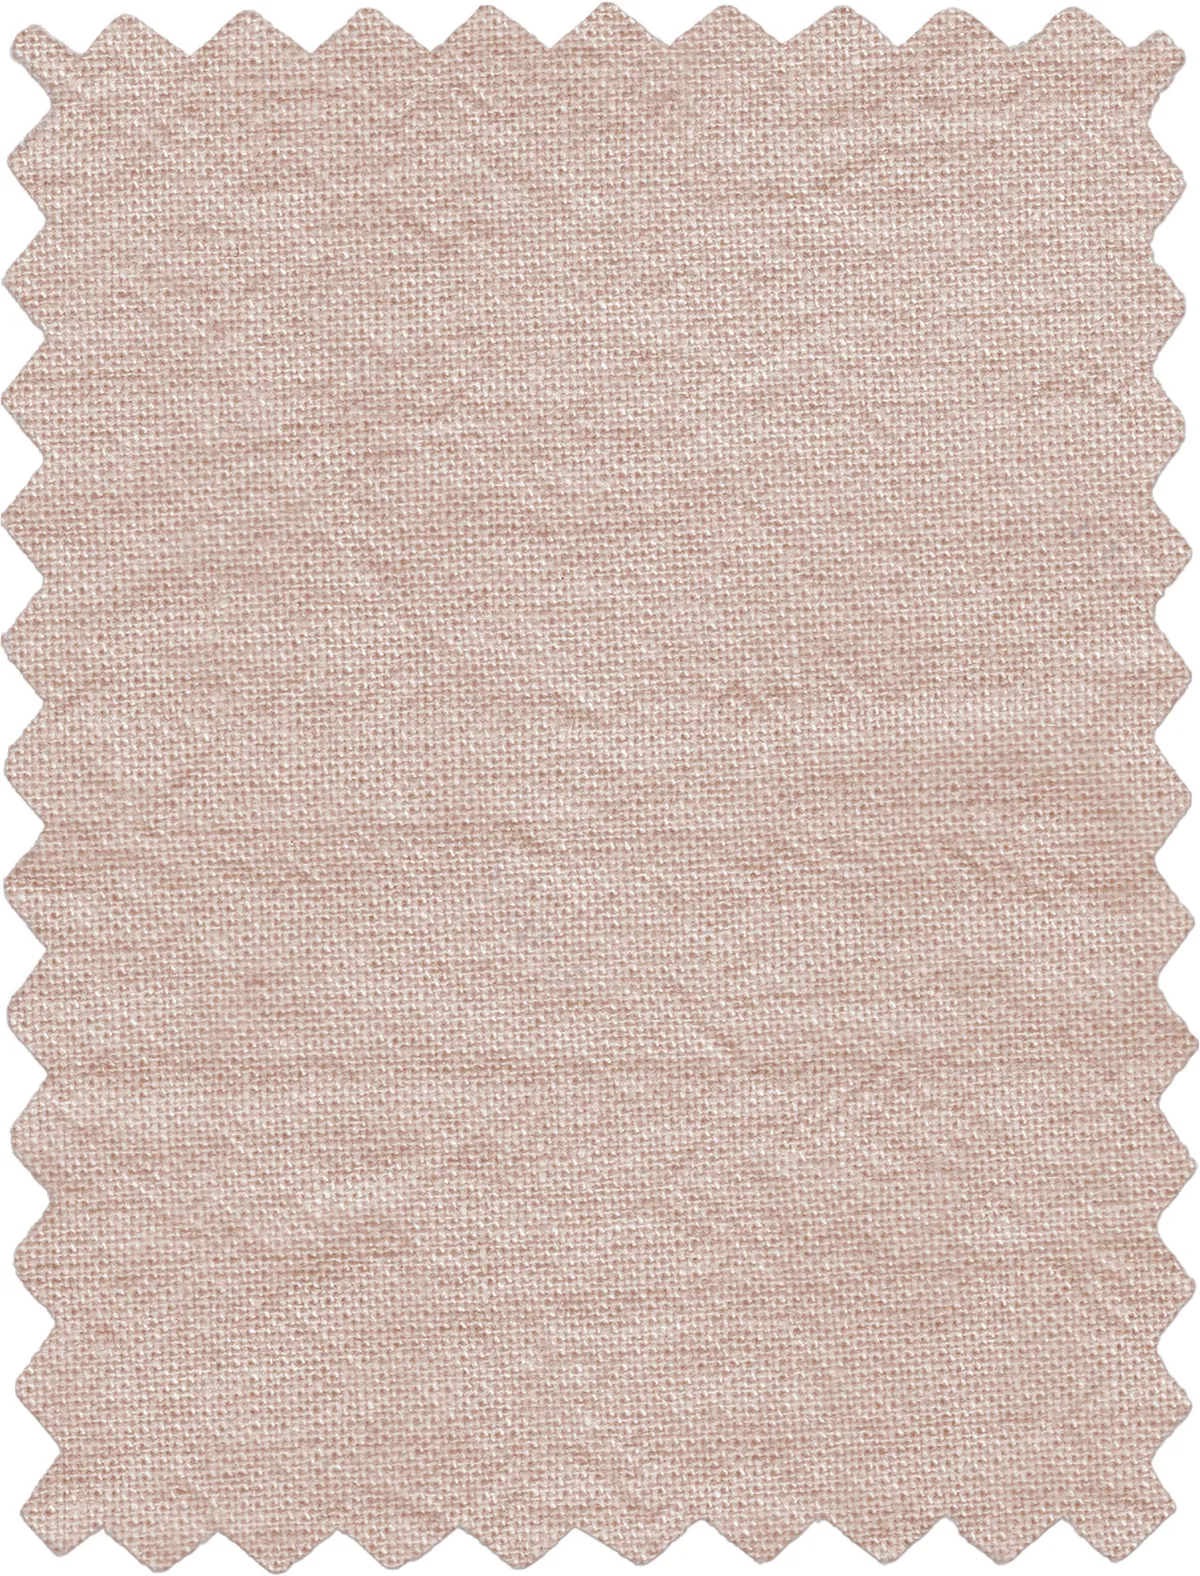 Antoinette and Old White linen fabric, £39.95 per metre, Annie Sloan